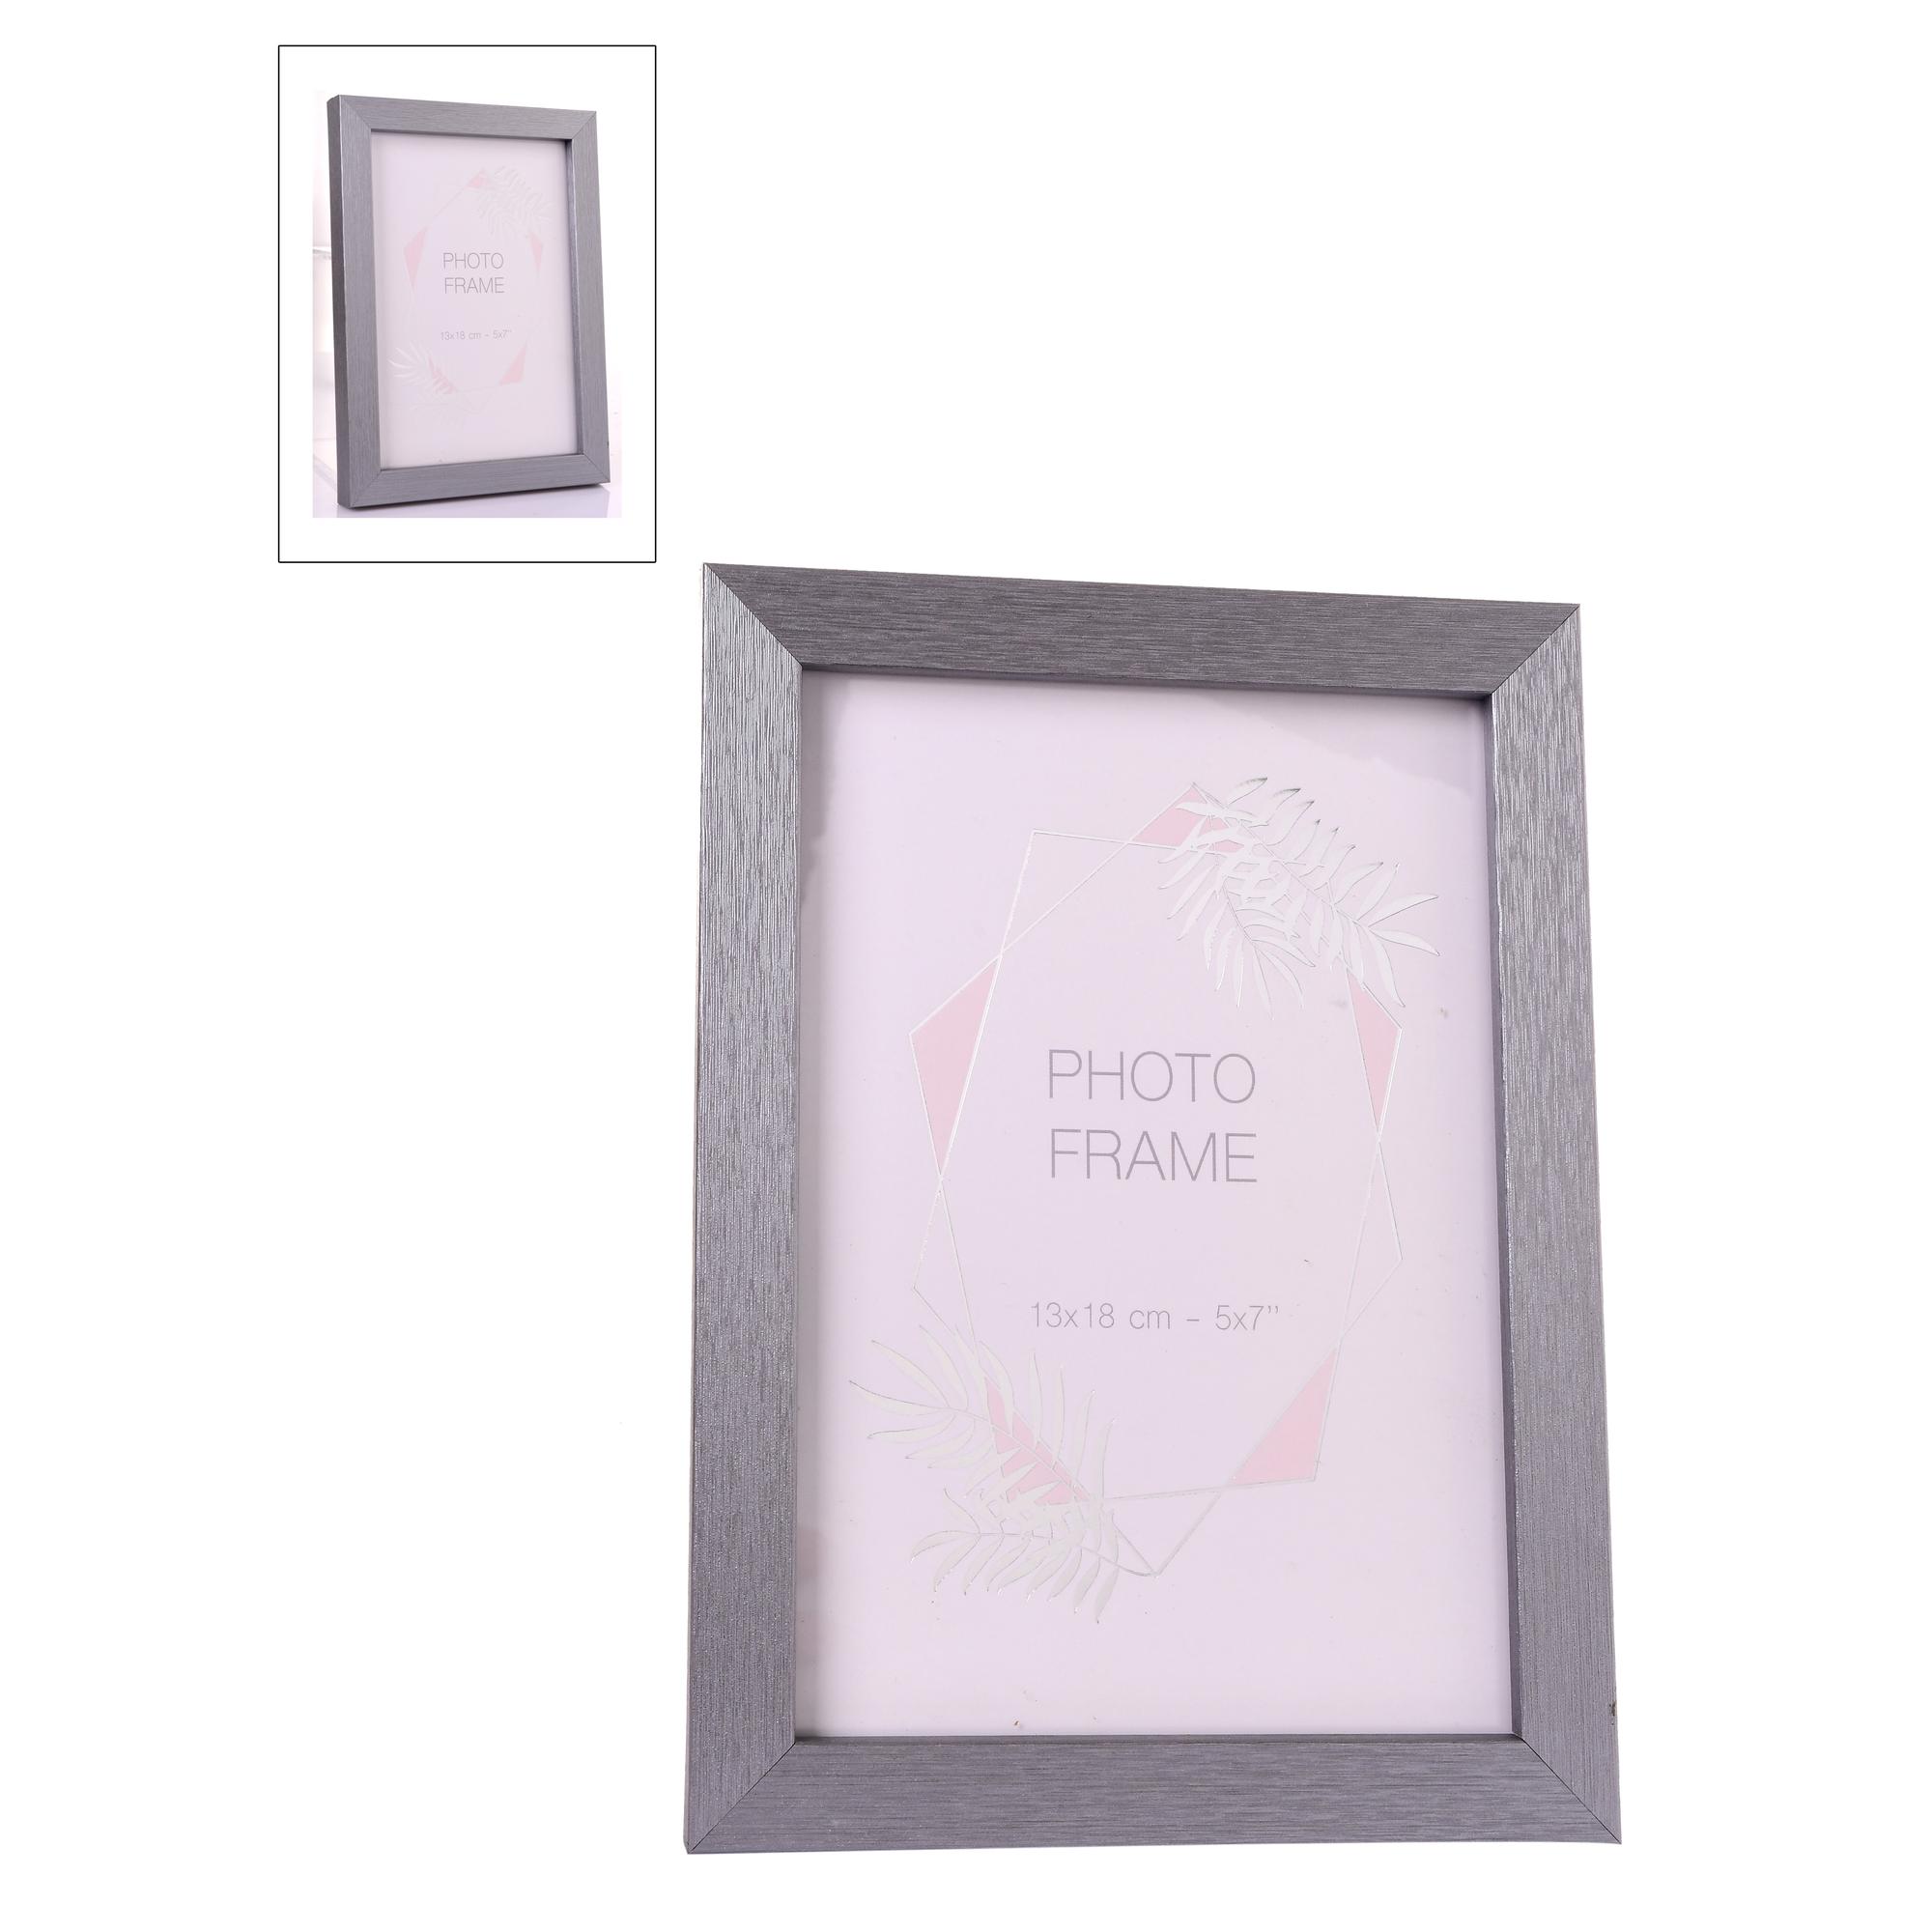 PICTURE FRAME 5X7 - 531-26229